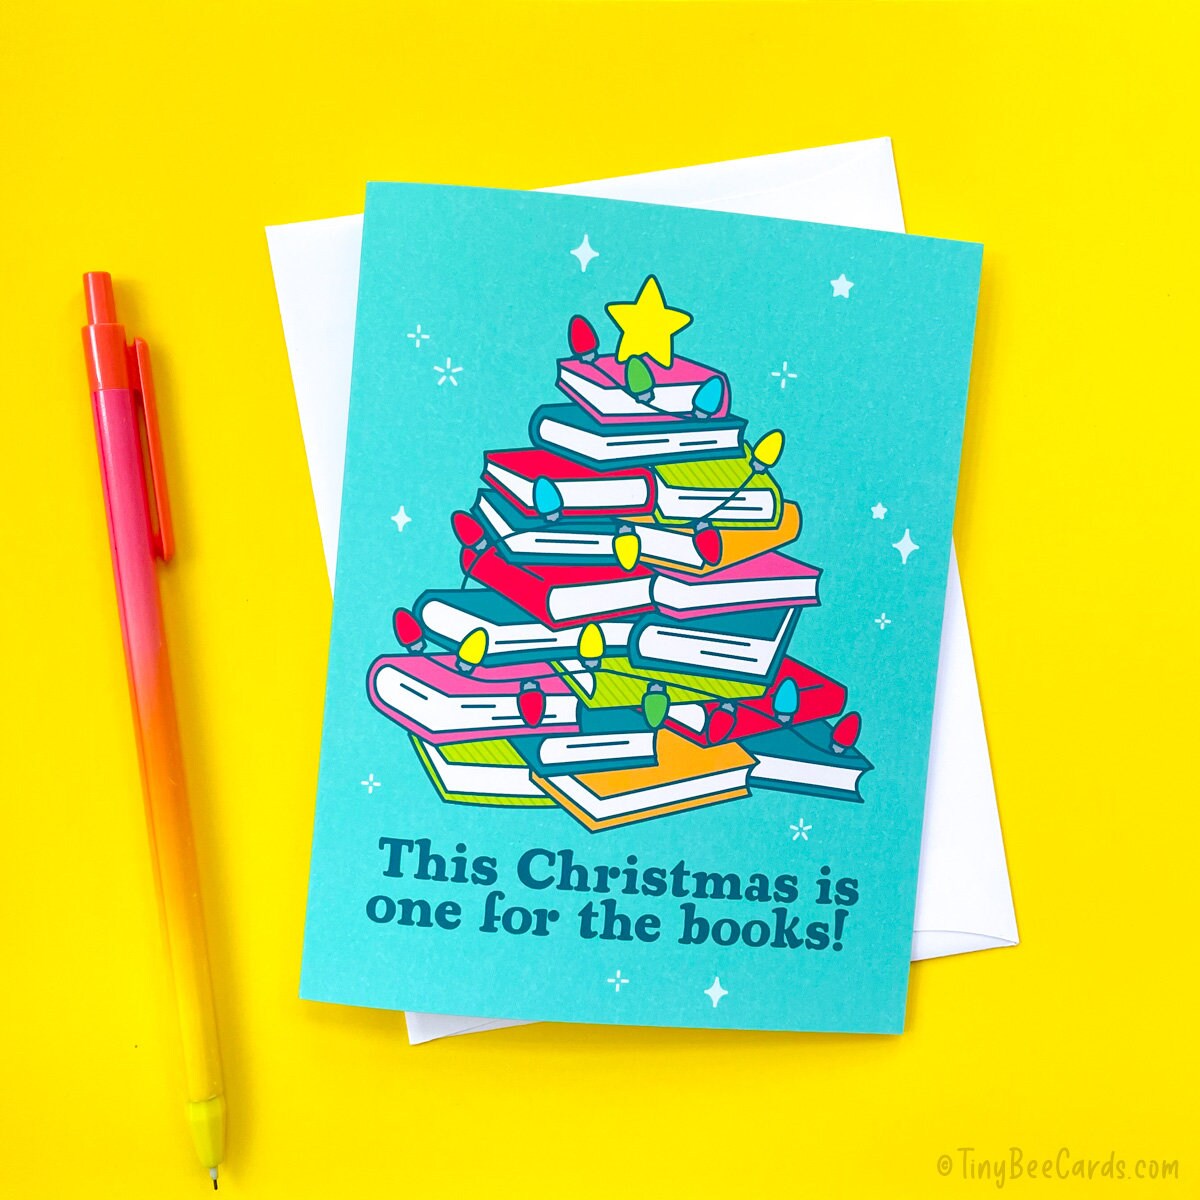 Book Lover Christmas Card "One for the Books" - Bookworm and Reading Fans Greeting